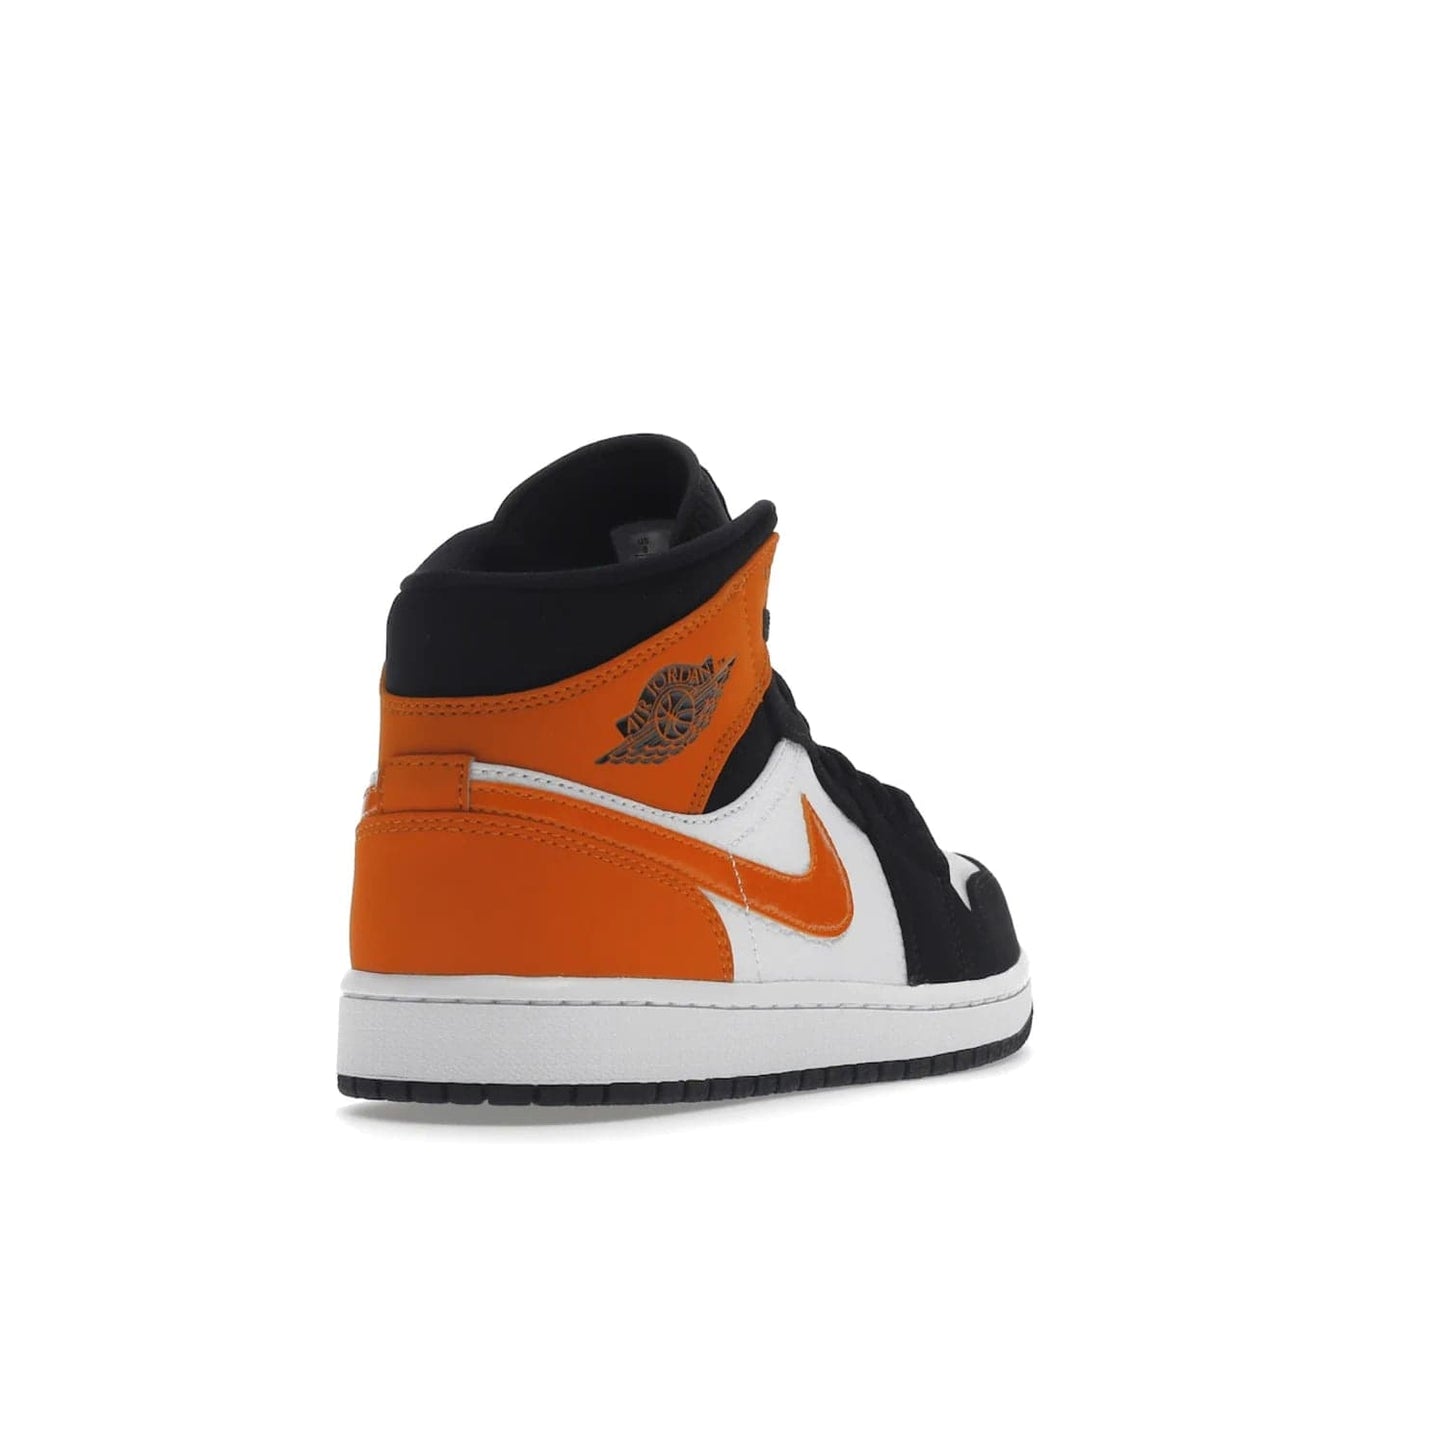 Jordan 1 Mid Shattered Backboard - Image 31 - Only at www.BallersClubKickz.com - The Air Jordan 1 Mid Shattered Backboard offers a timeless Black/White-Starfish colorway. Classic Swoosh logo and AJ insignia plus a shatterd backboard graphic on the insole. Get your pair today!